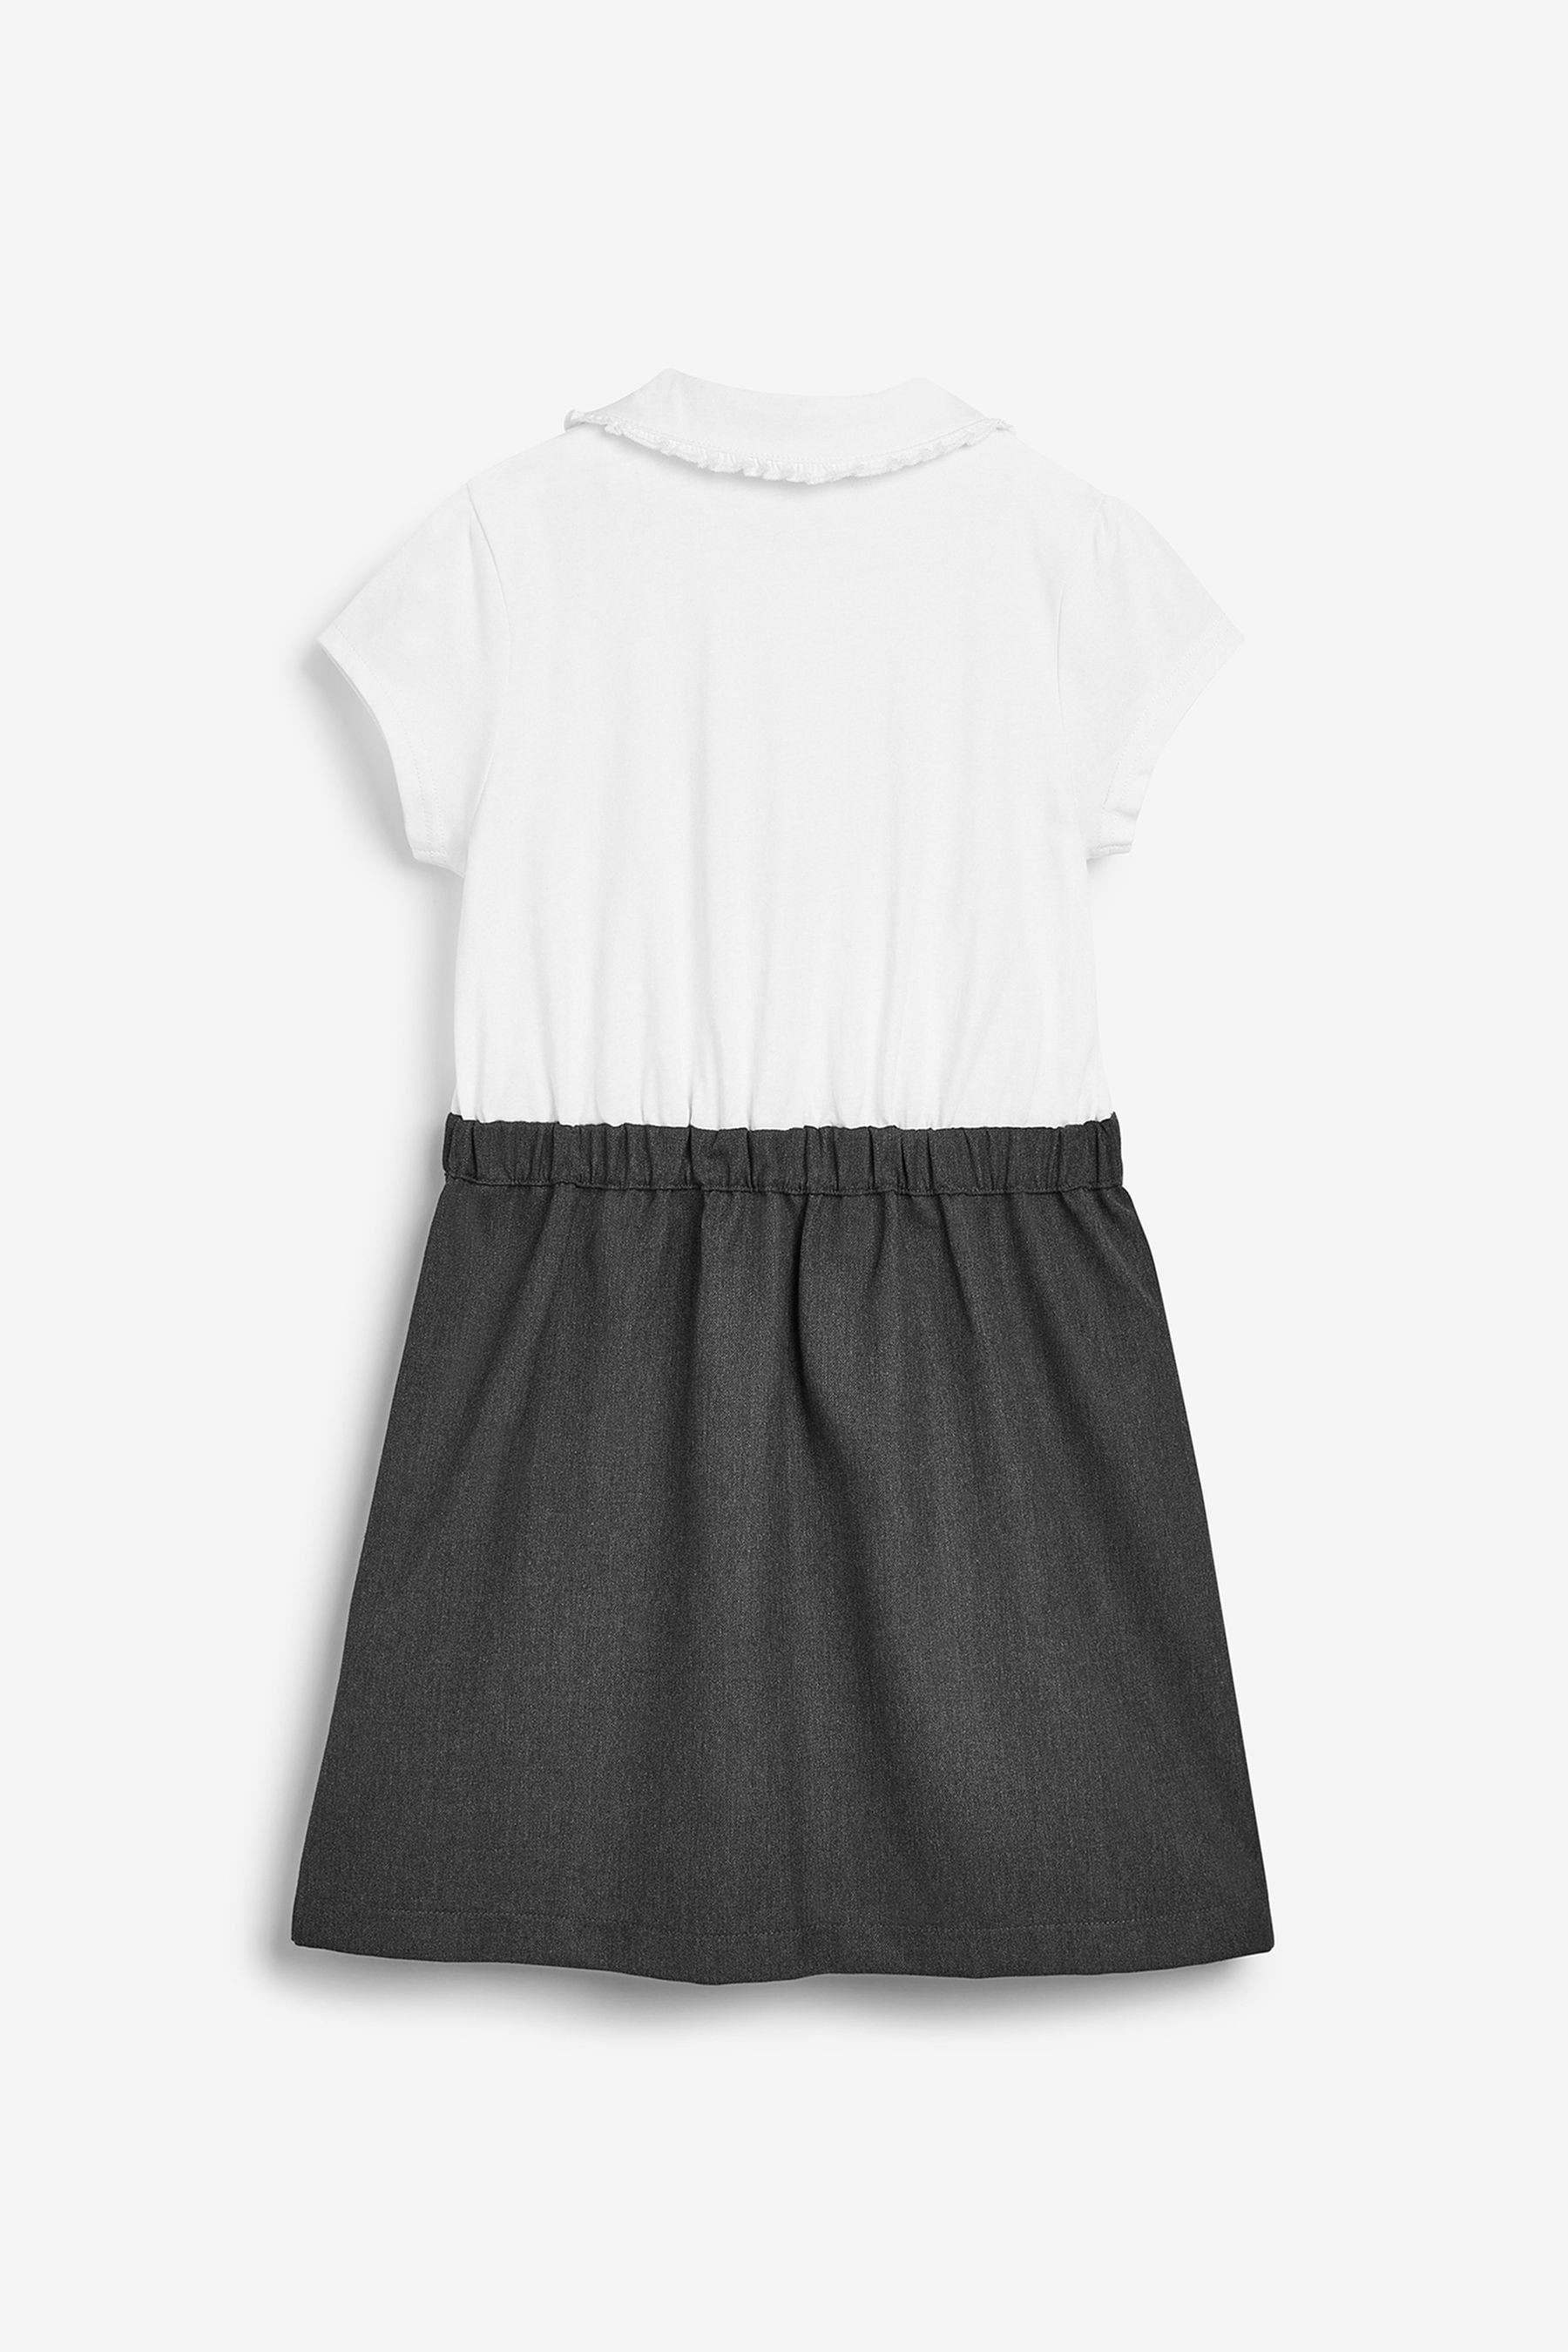 Buy Grey 2-In-1 Short Sleeve School Pinafore Dress (3-14yrs) from the ...